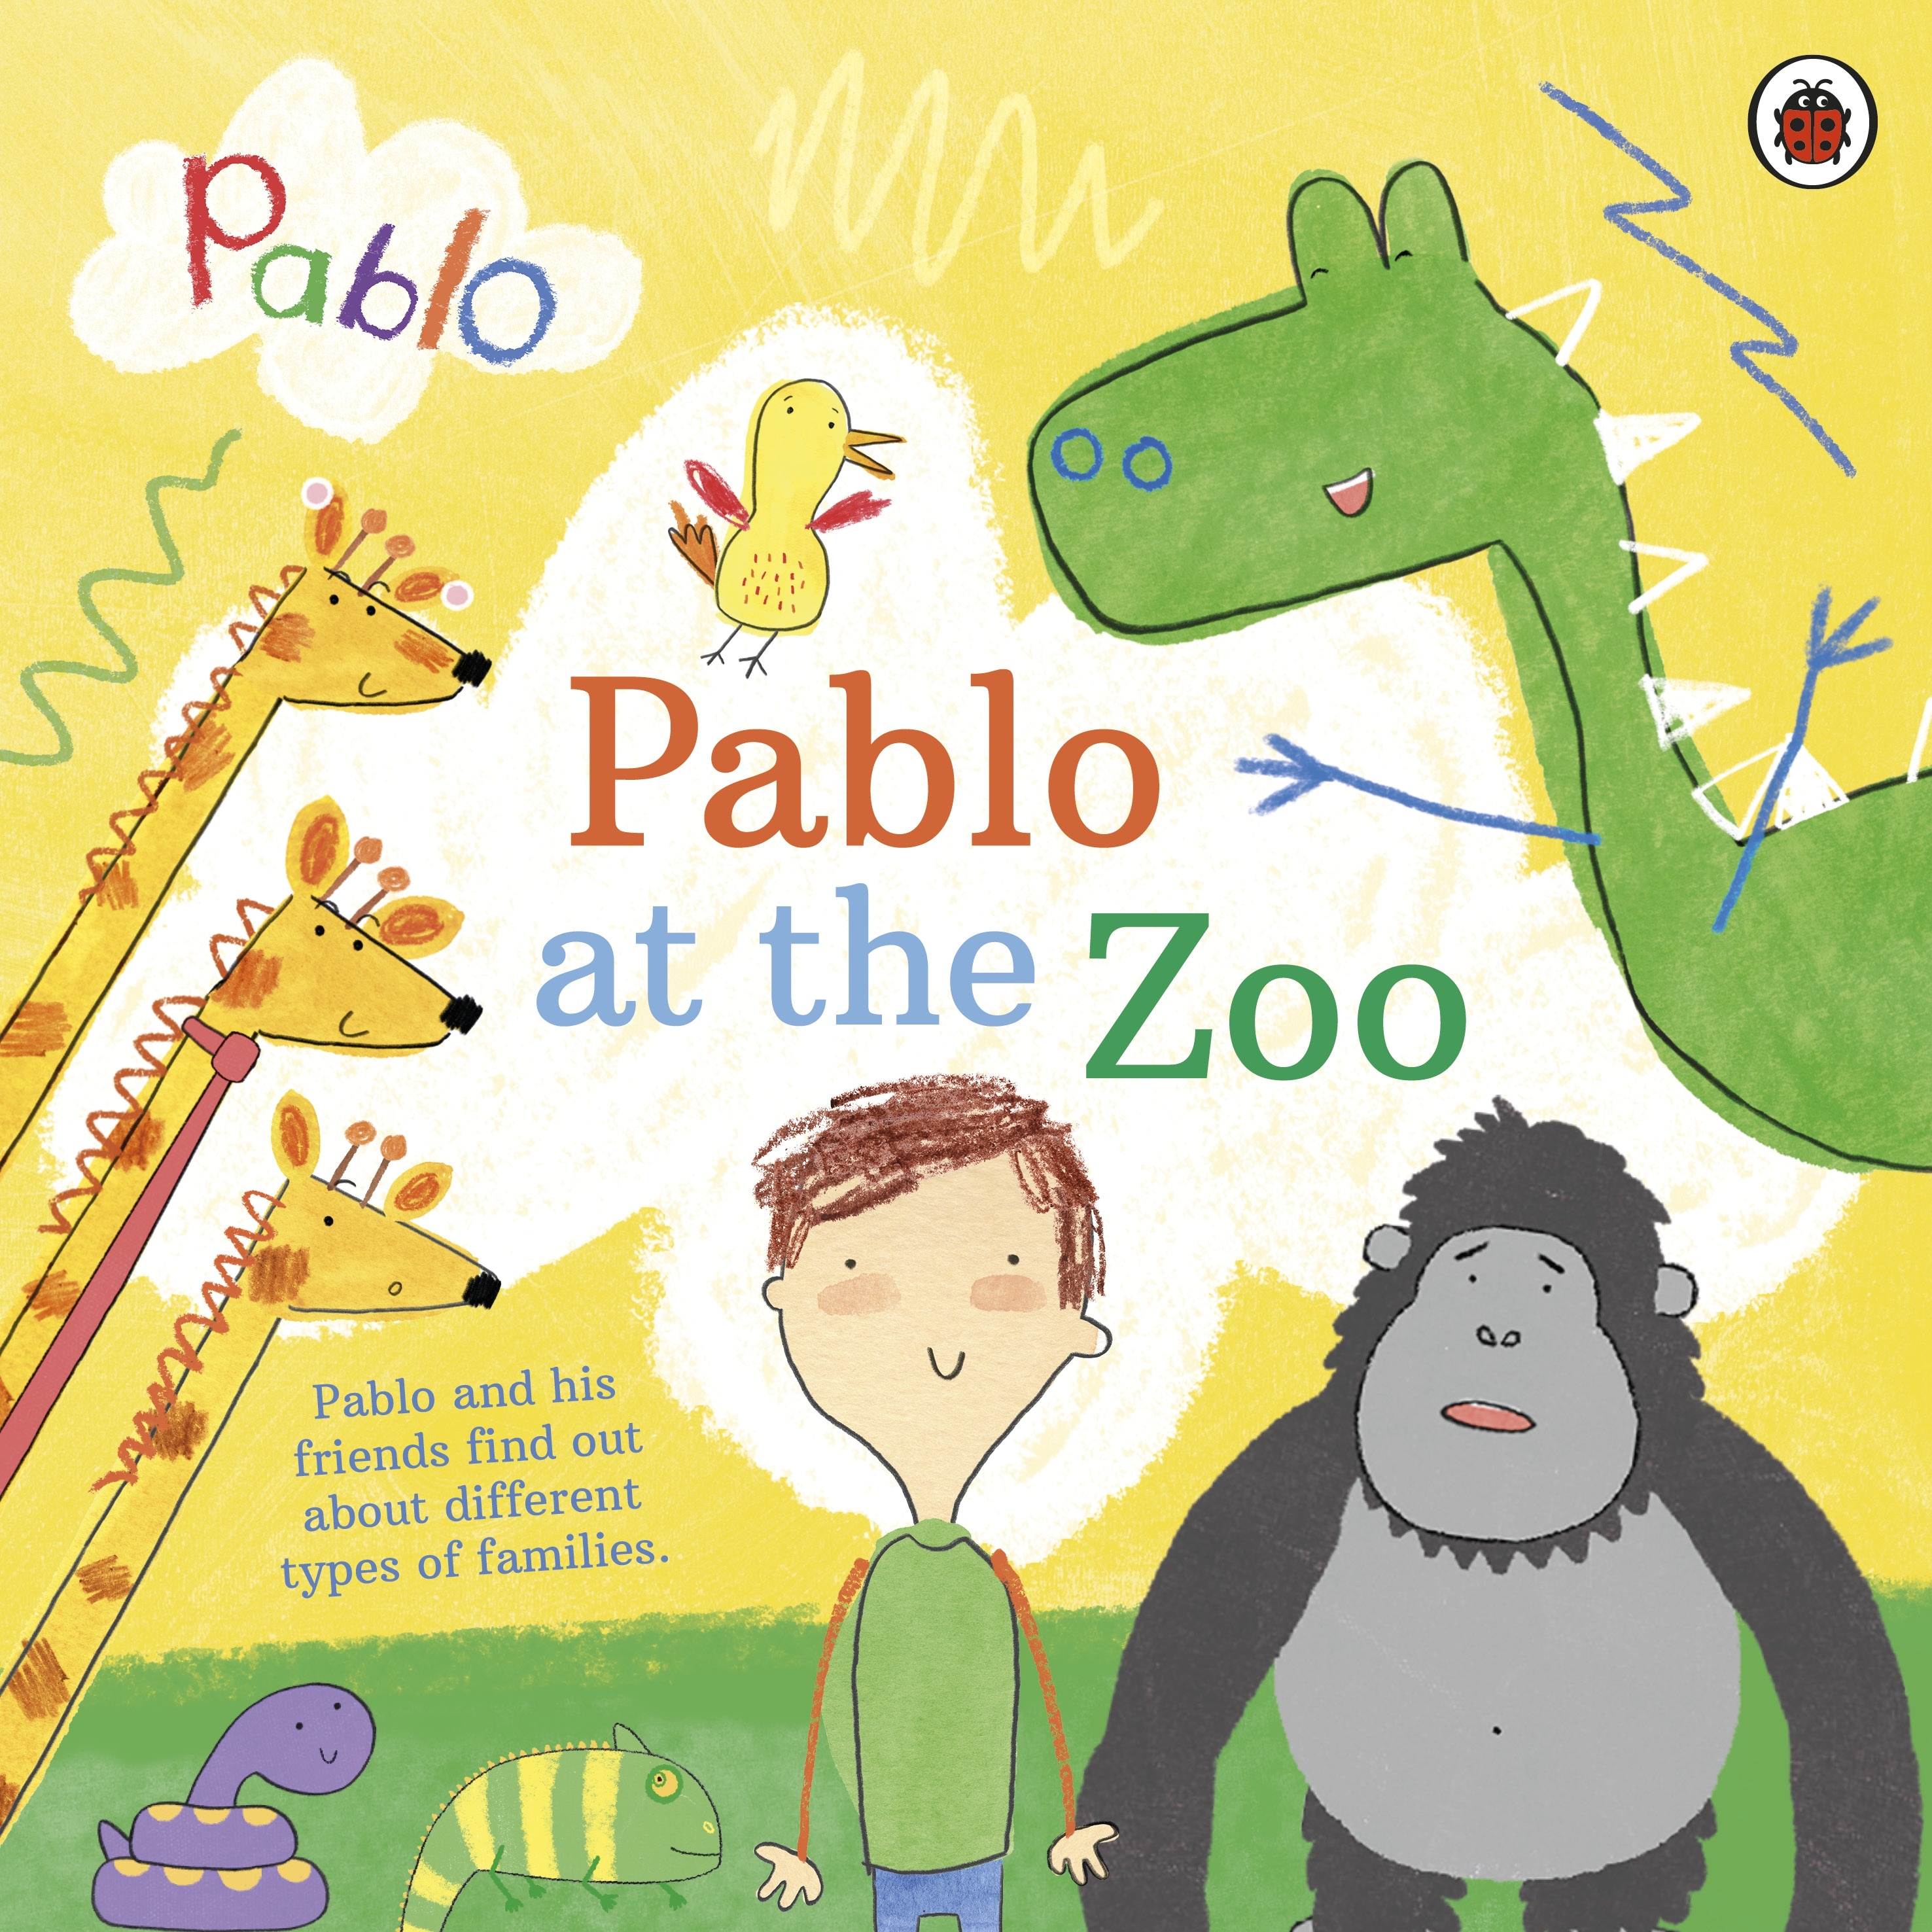 Book “Pablo At The Zoo” by Pablo — August 5, 2021